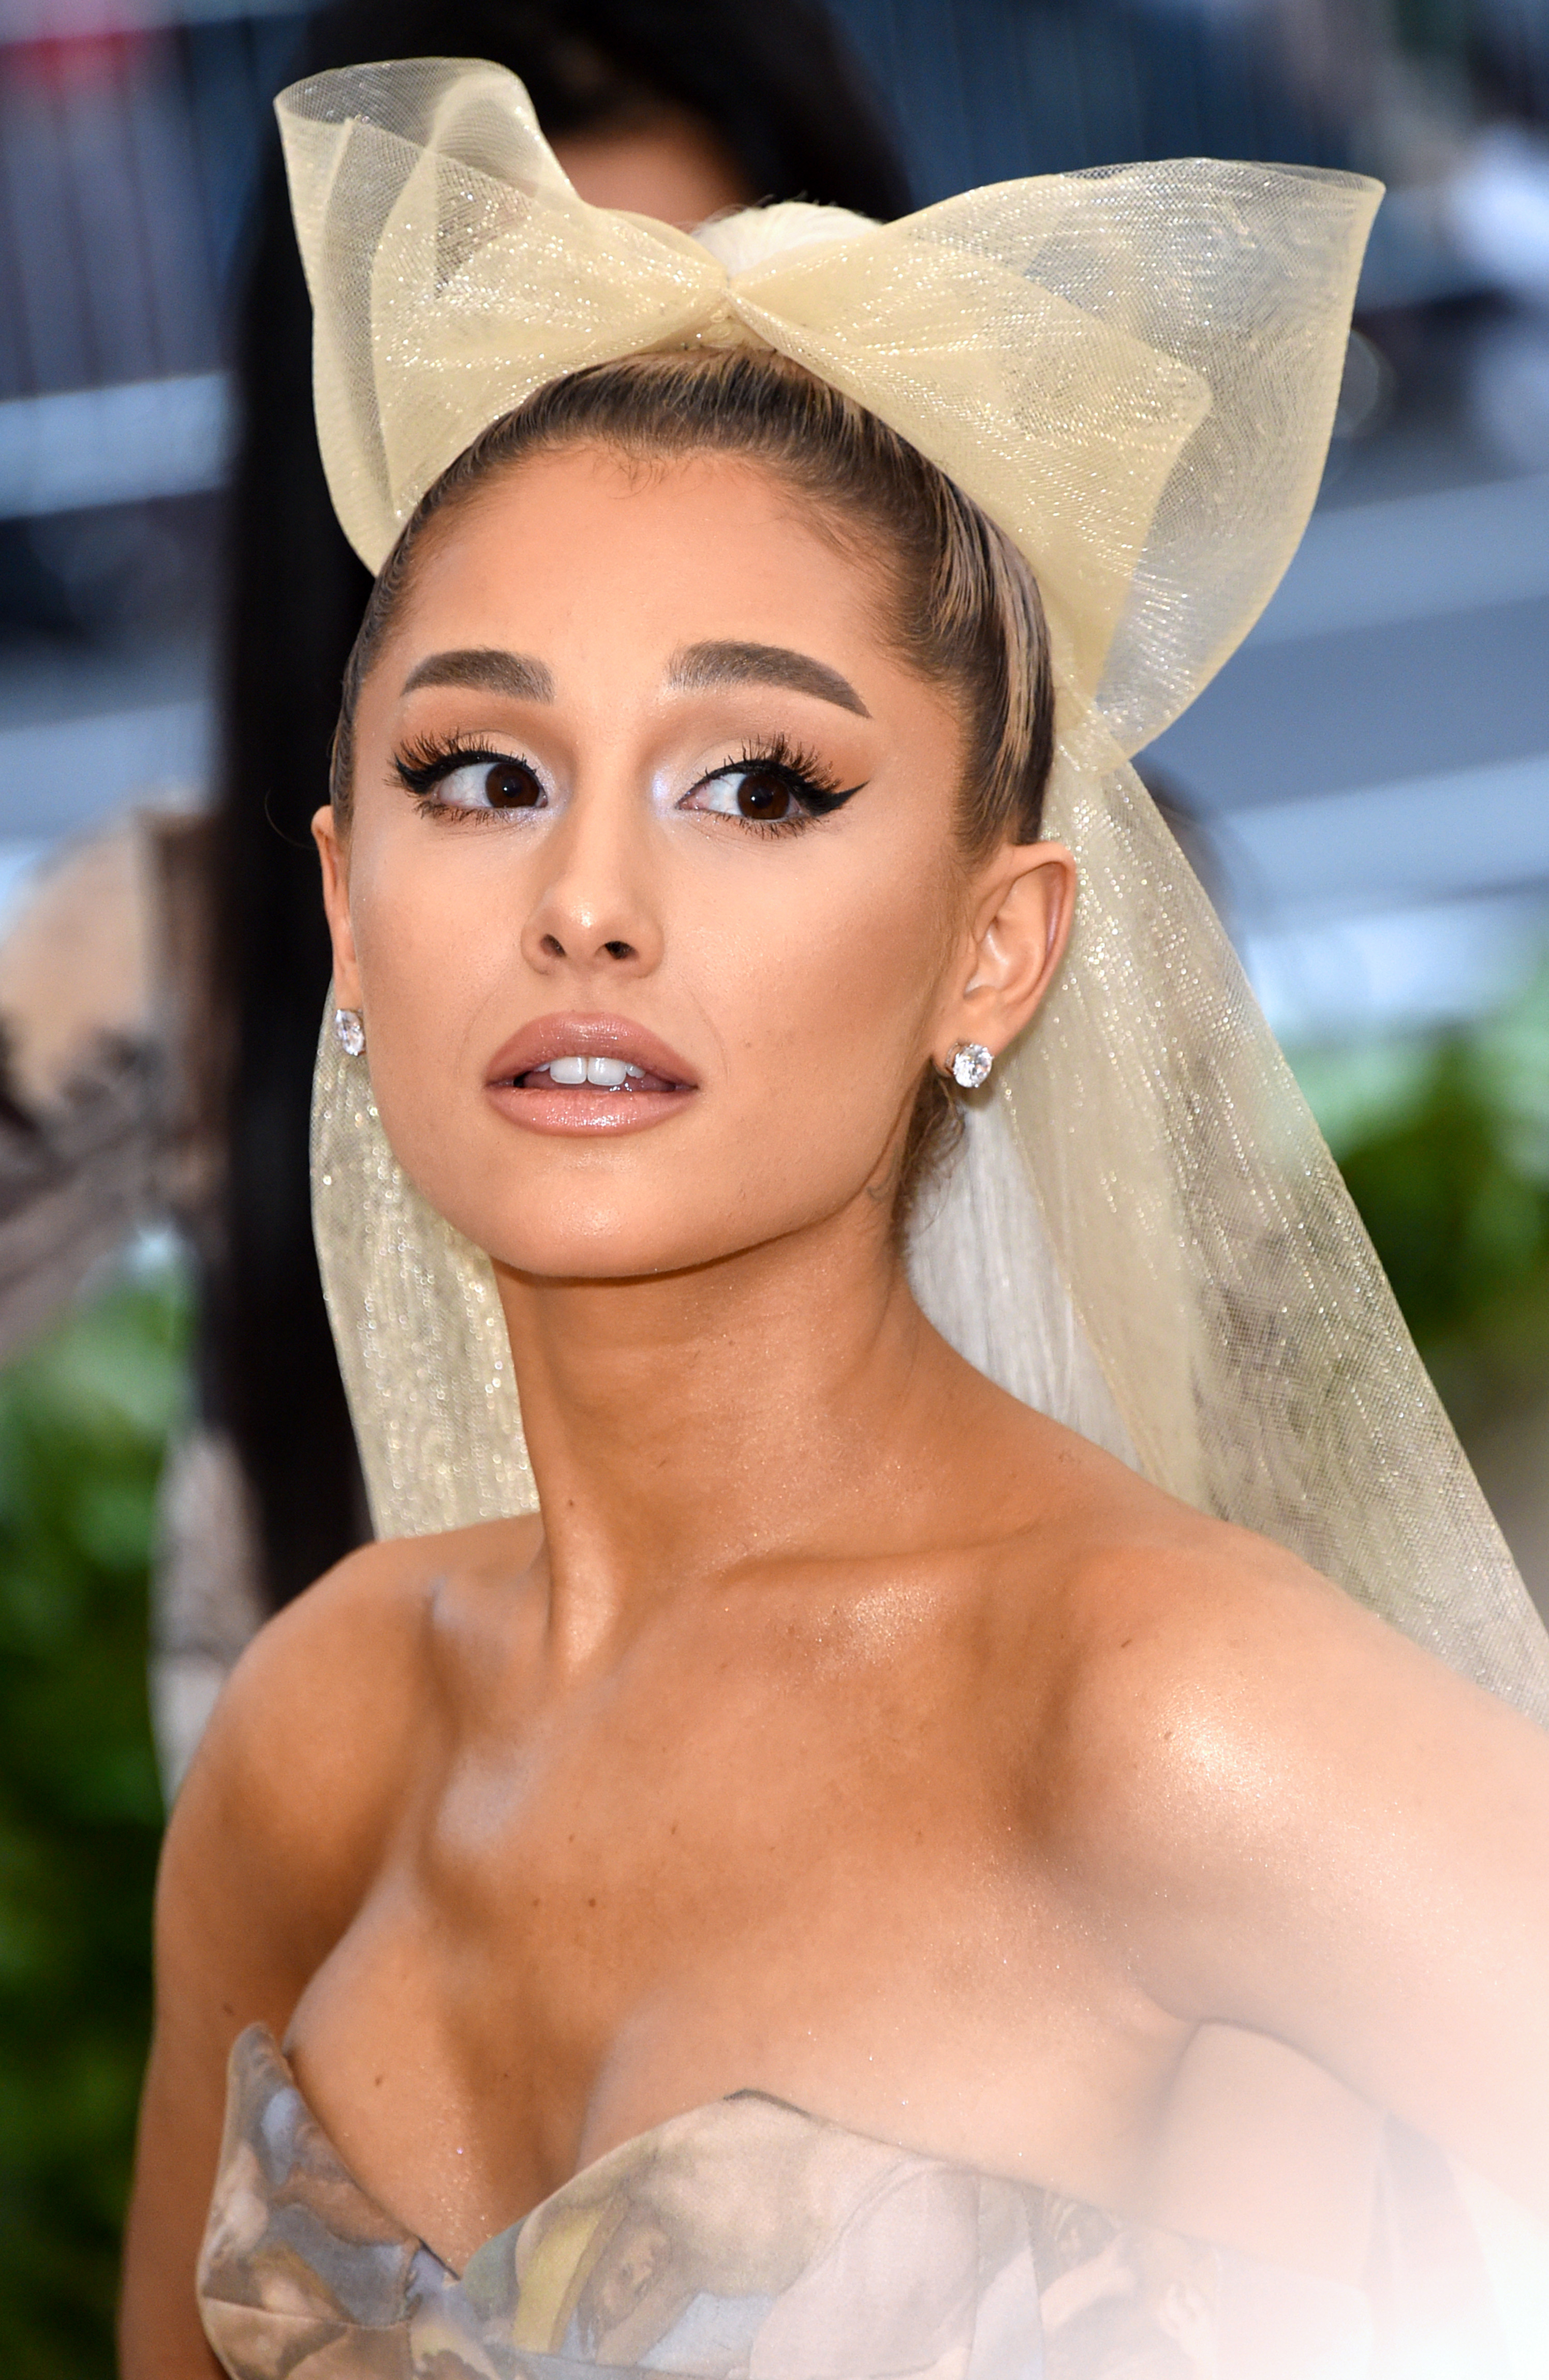 Ariana Grande is wearing a strapless gown and a large, sheer bow in her hair at a formal event